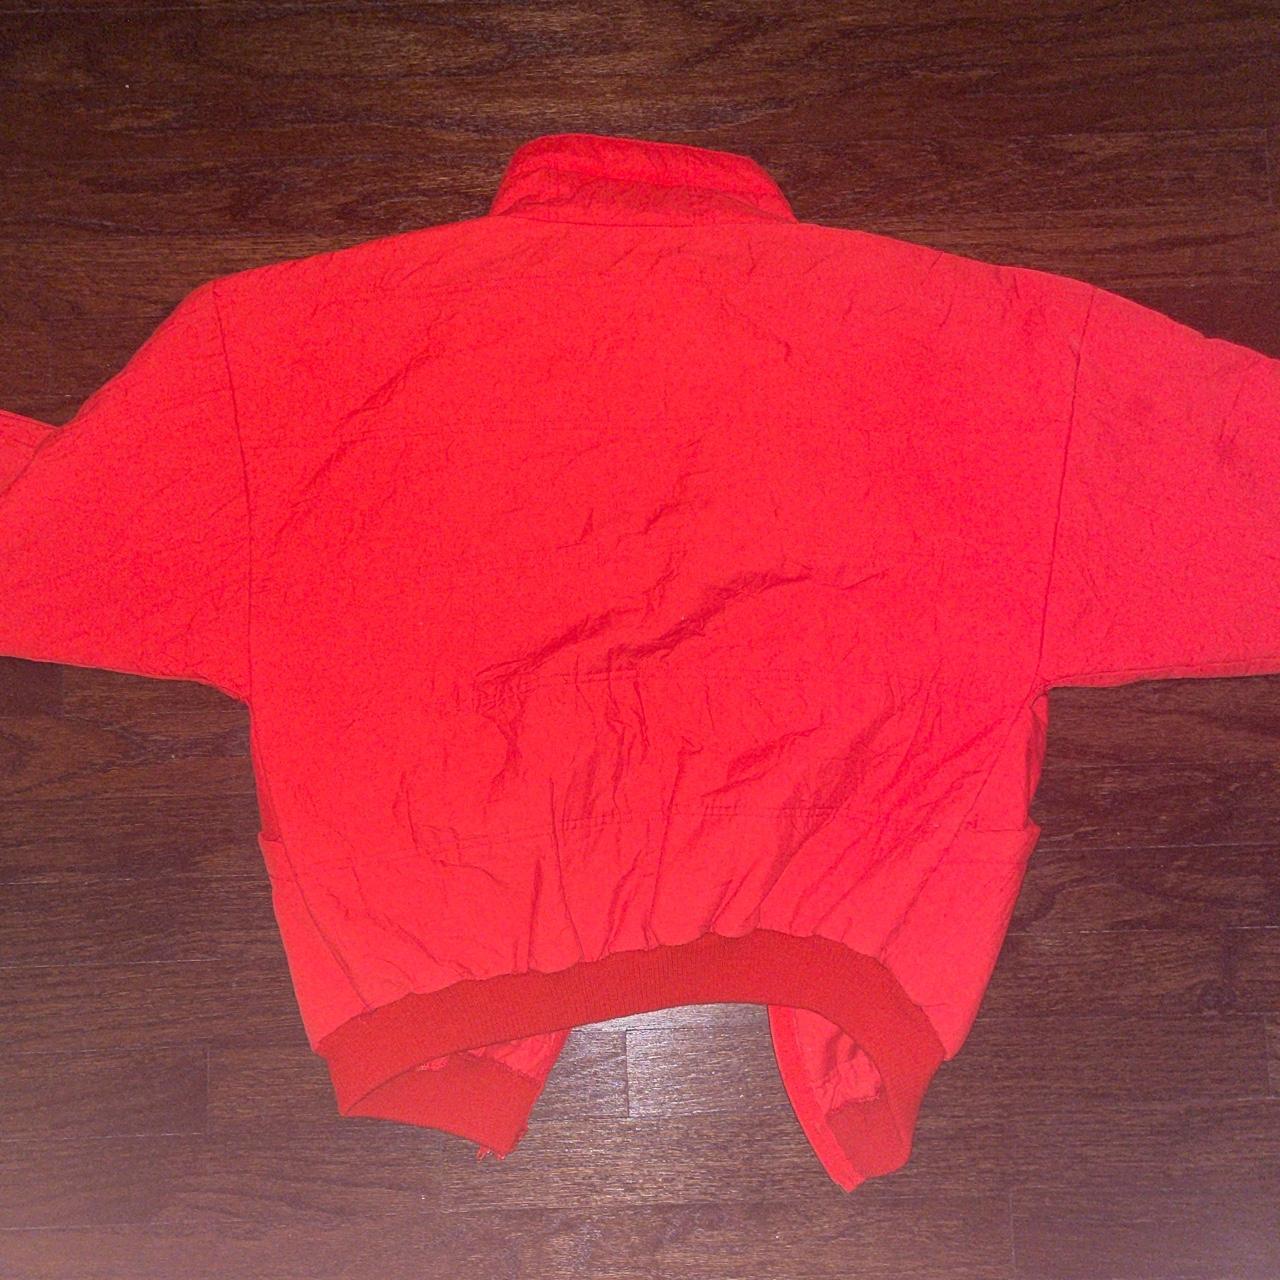 Product Image 3 - Red collared jacket
Semi-puffy, tapered sleeves